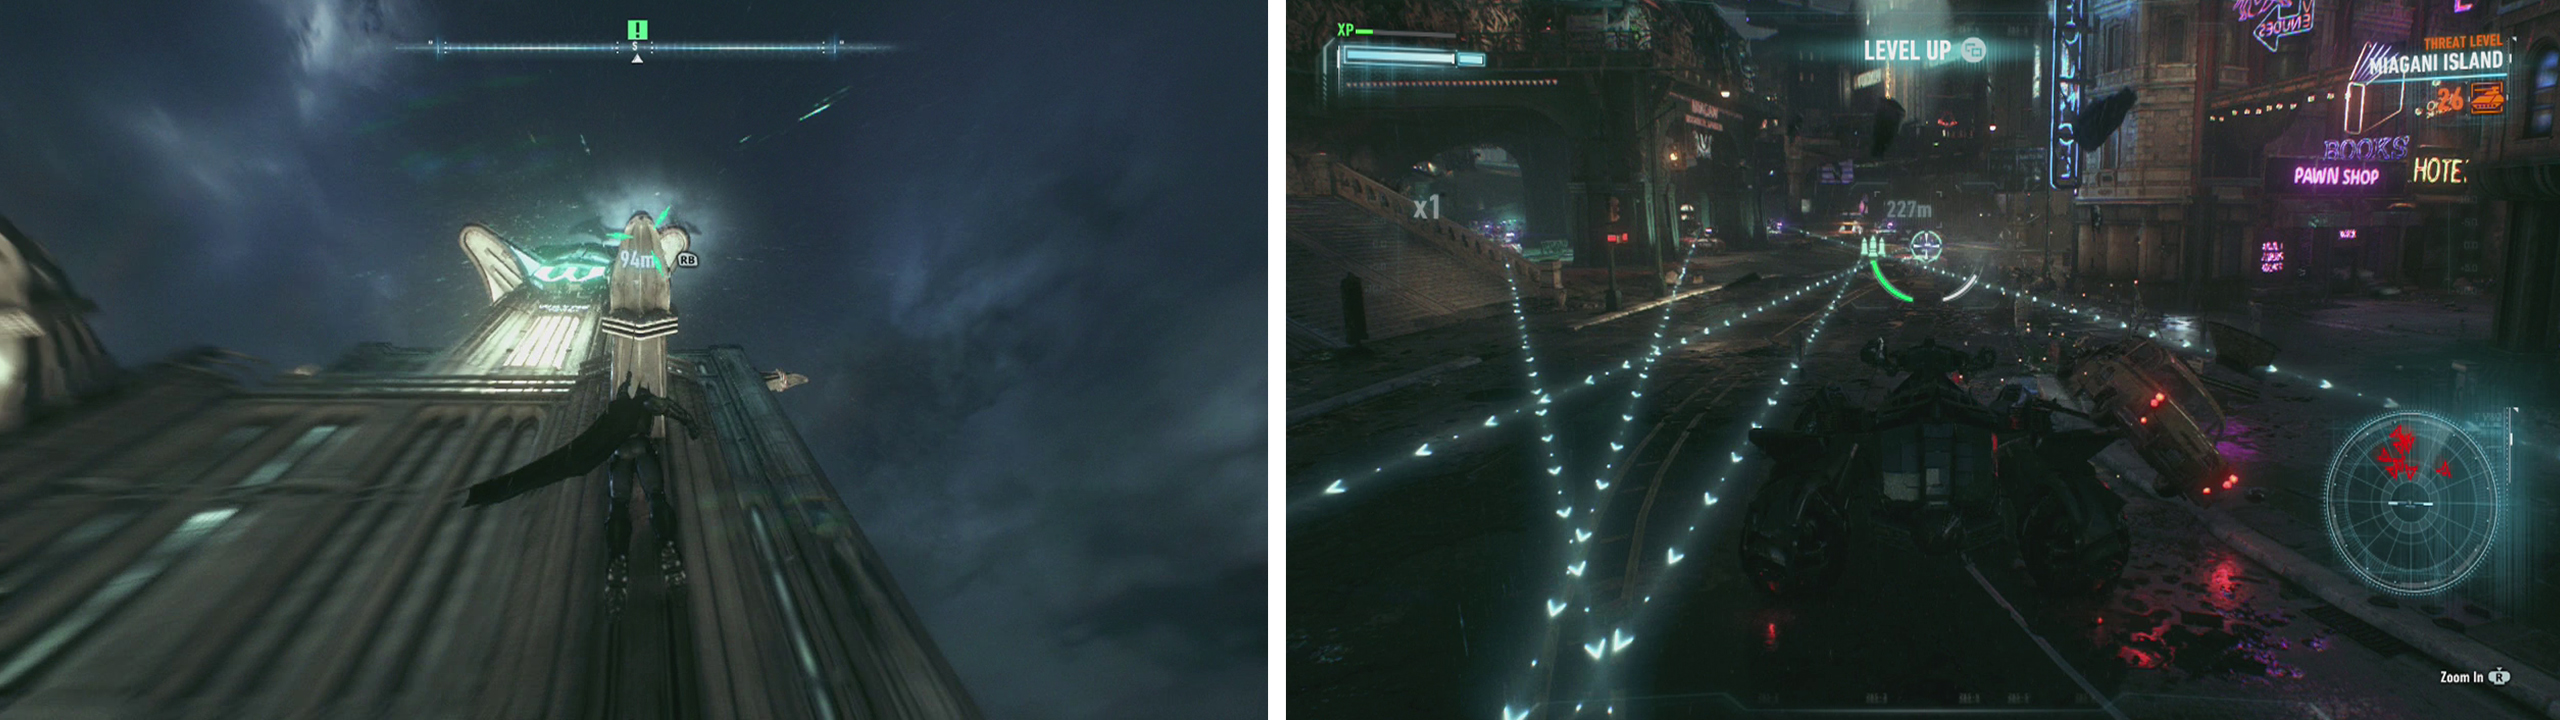 Fly to the top of Wayne Tower (left) for a Batmobile upgrade. Clear out the Drone Tanks from the entrance to the tunnel (right).